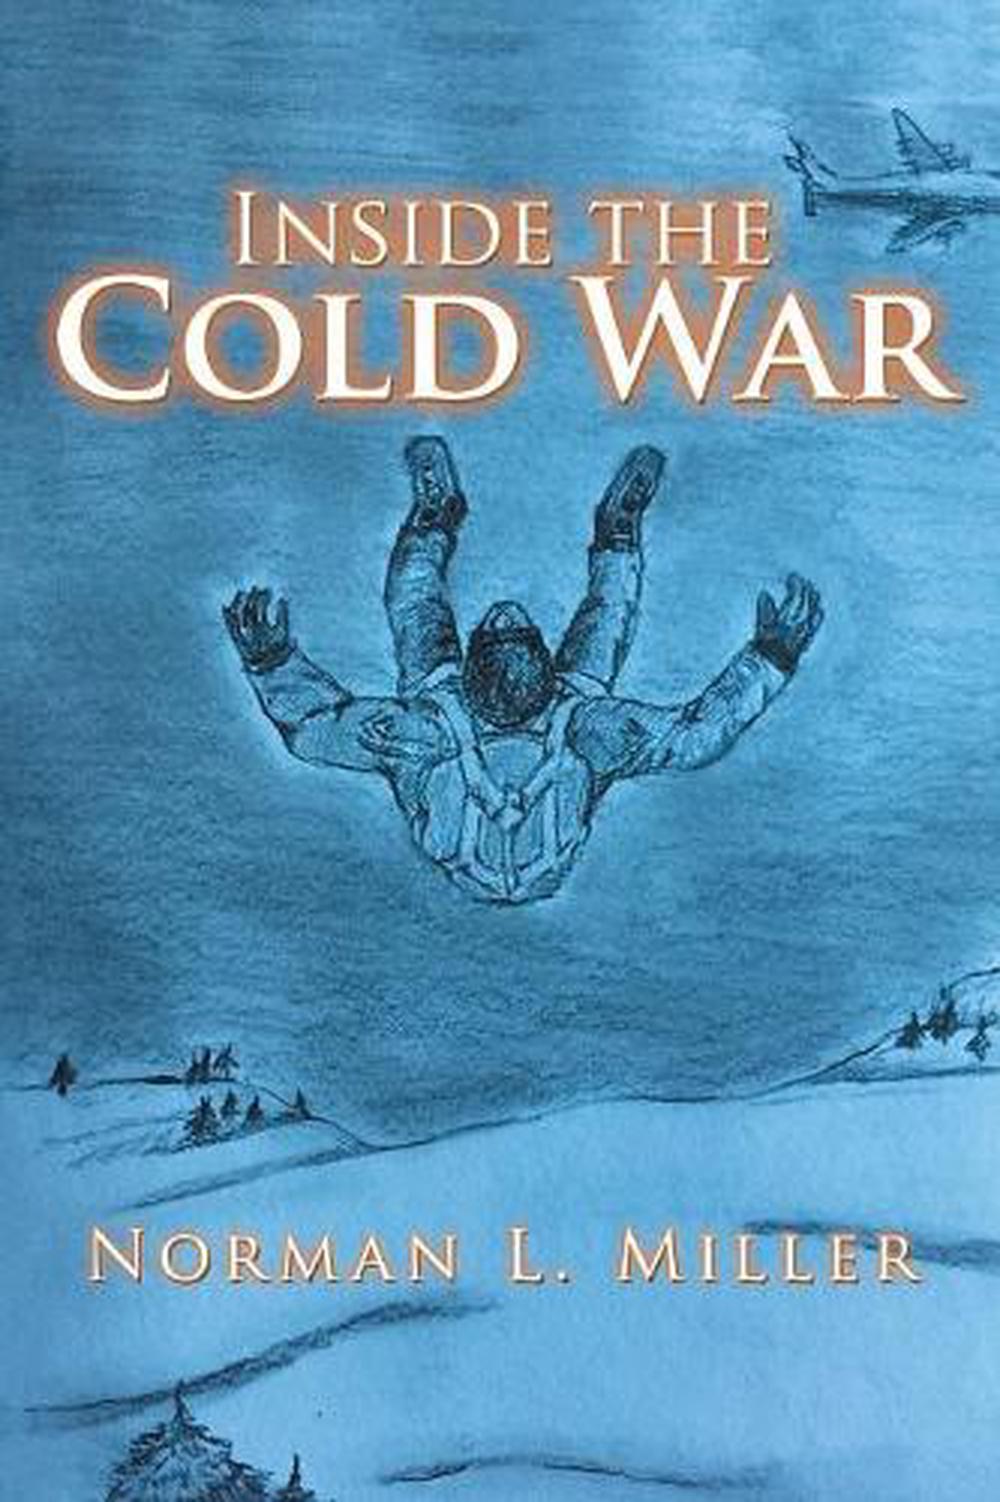 The Cold War by Martin Walker